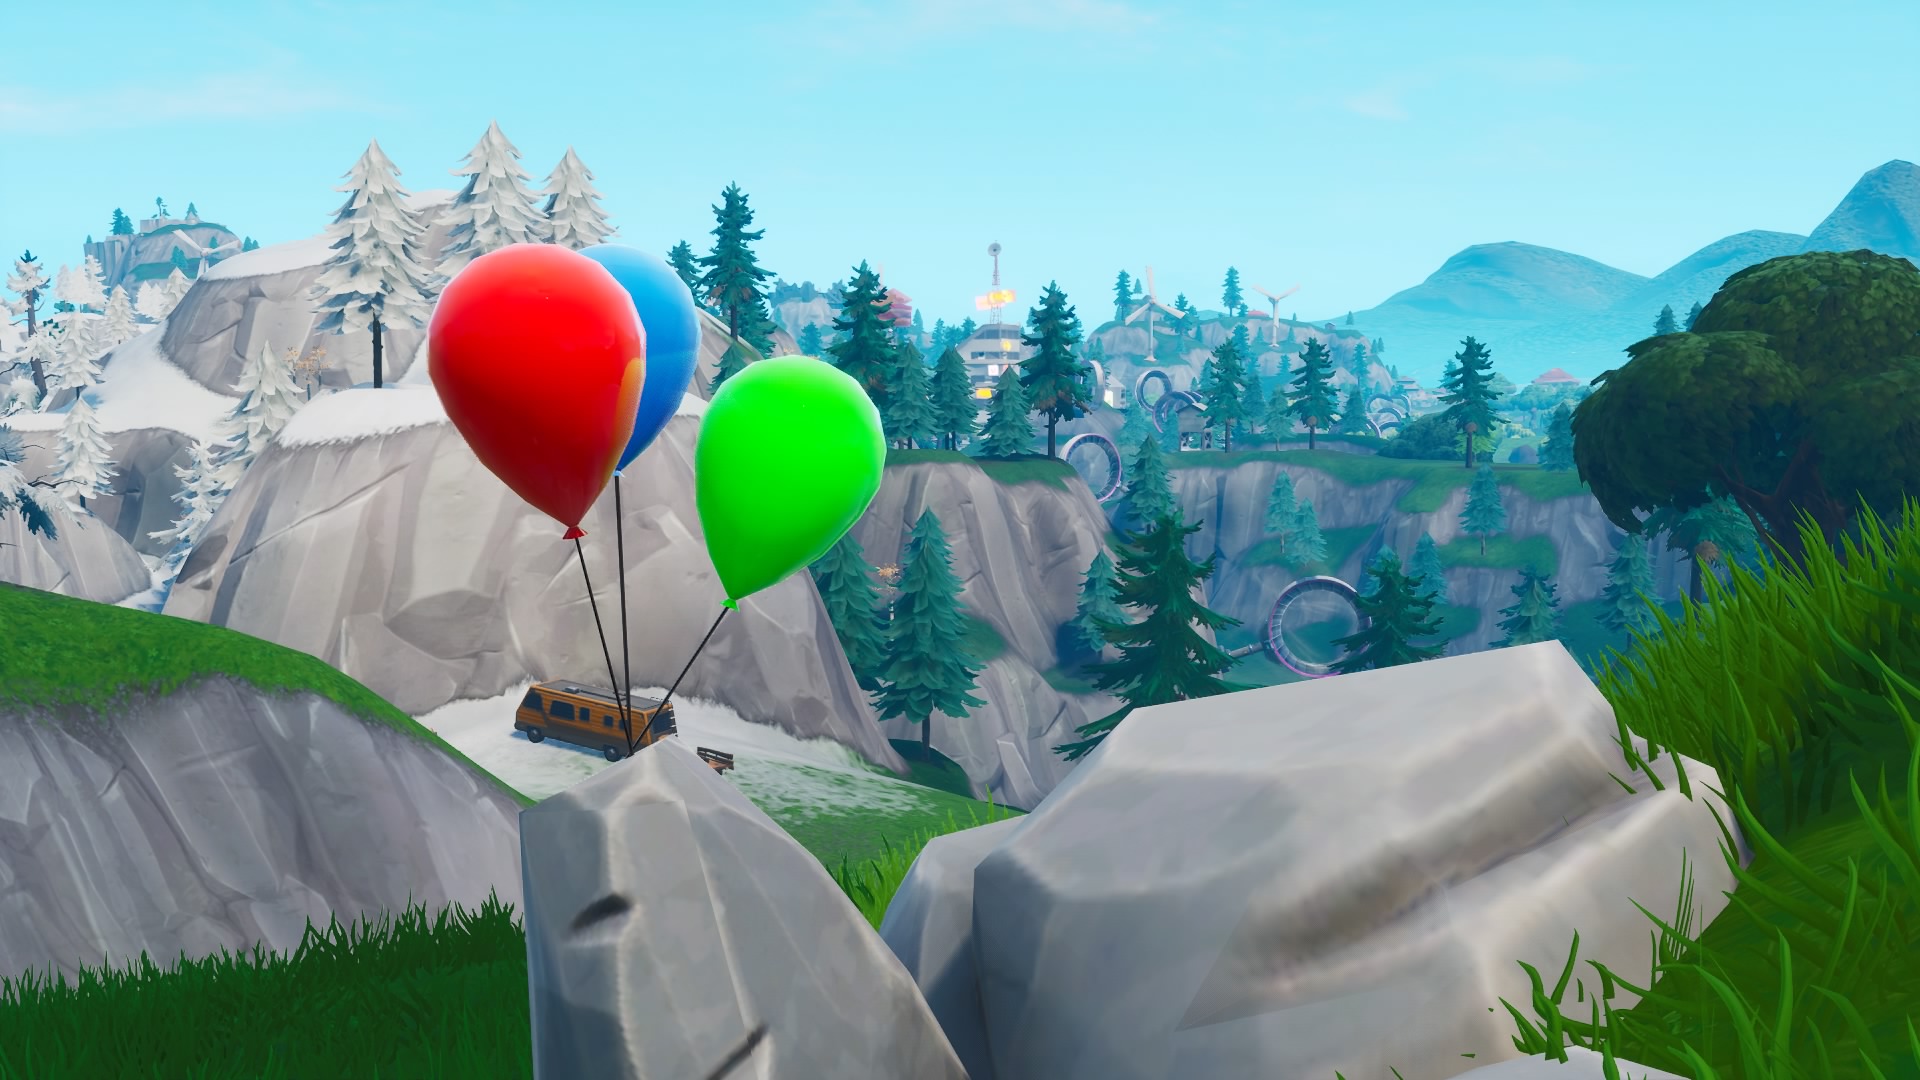 where to get party balloons